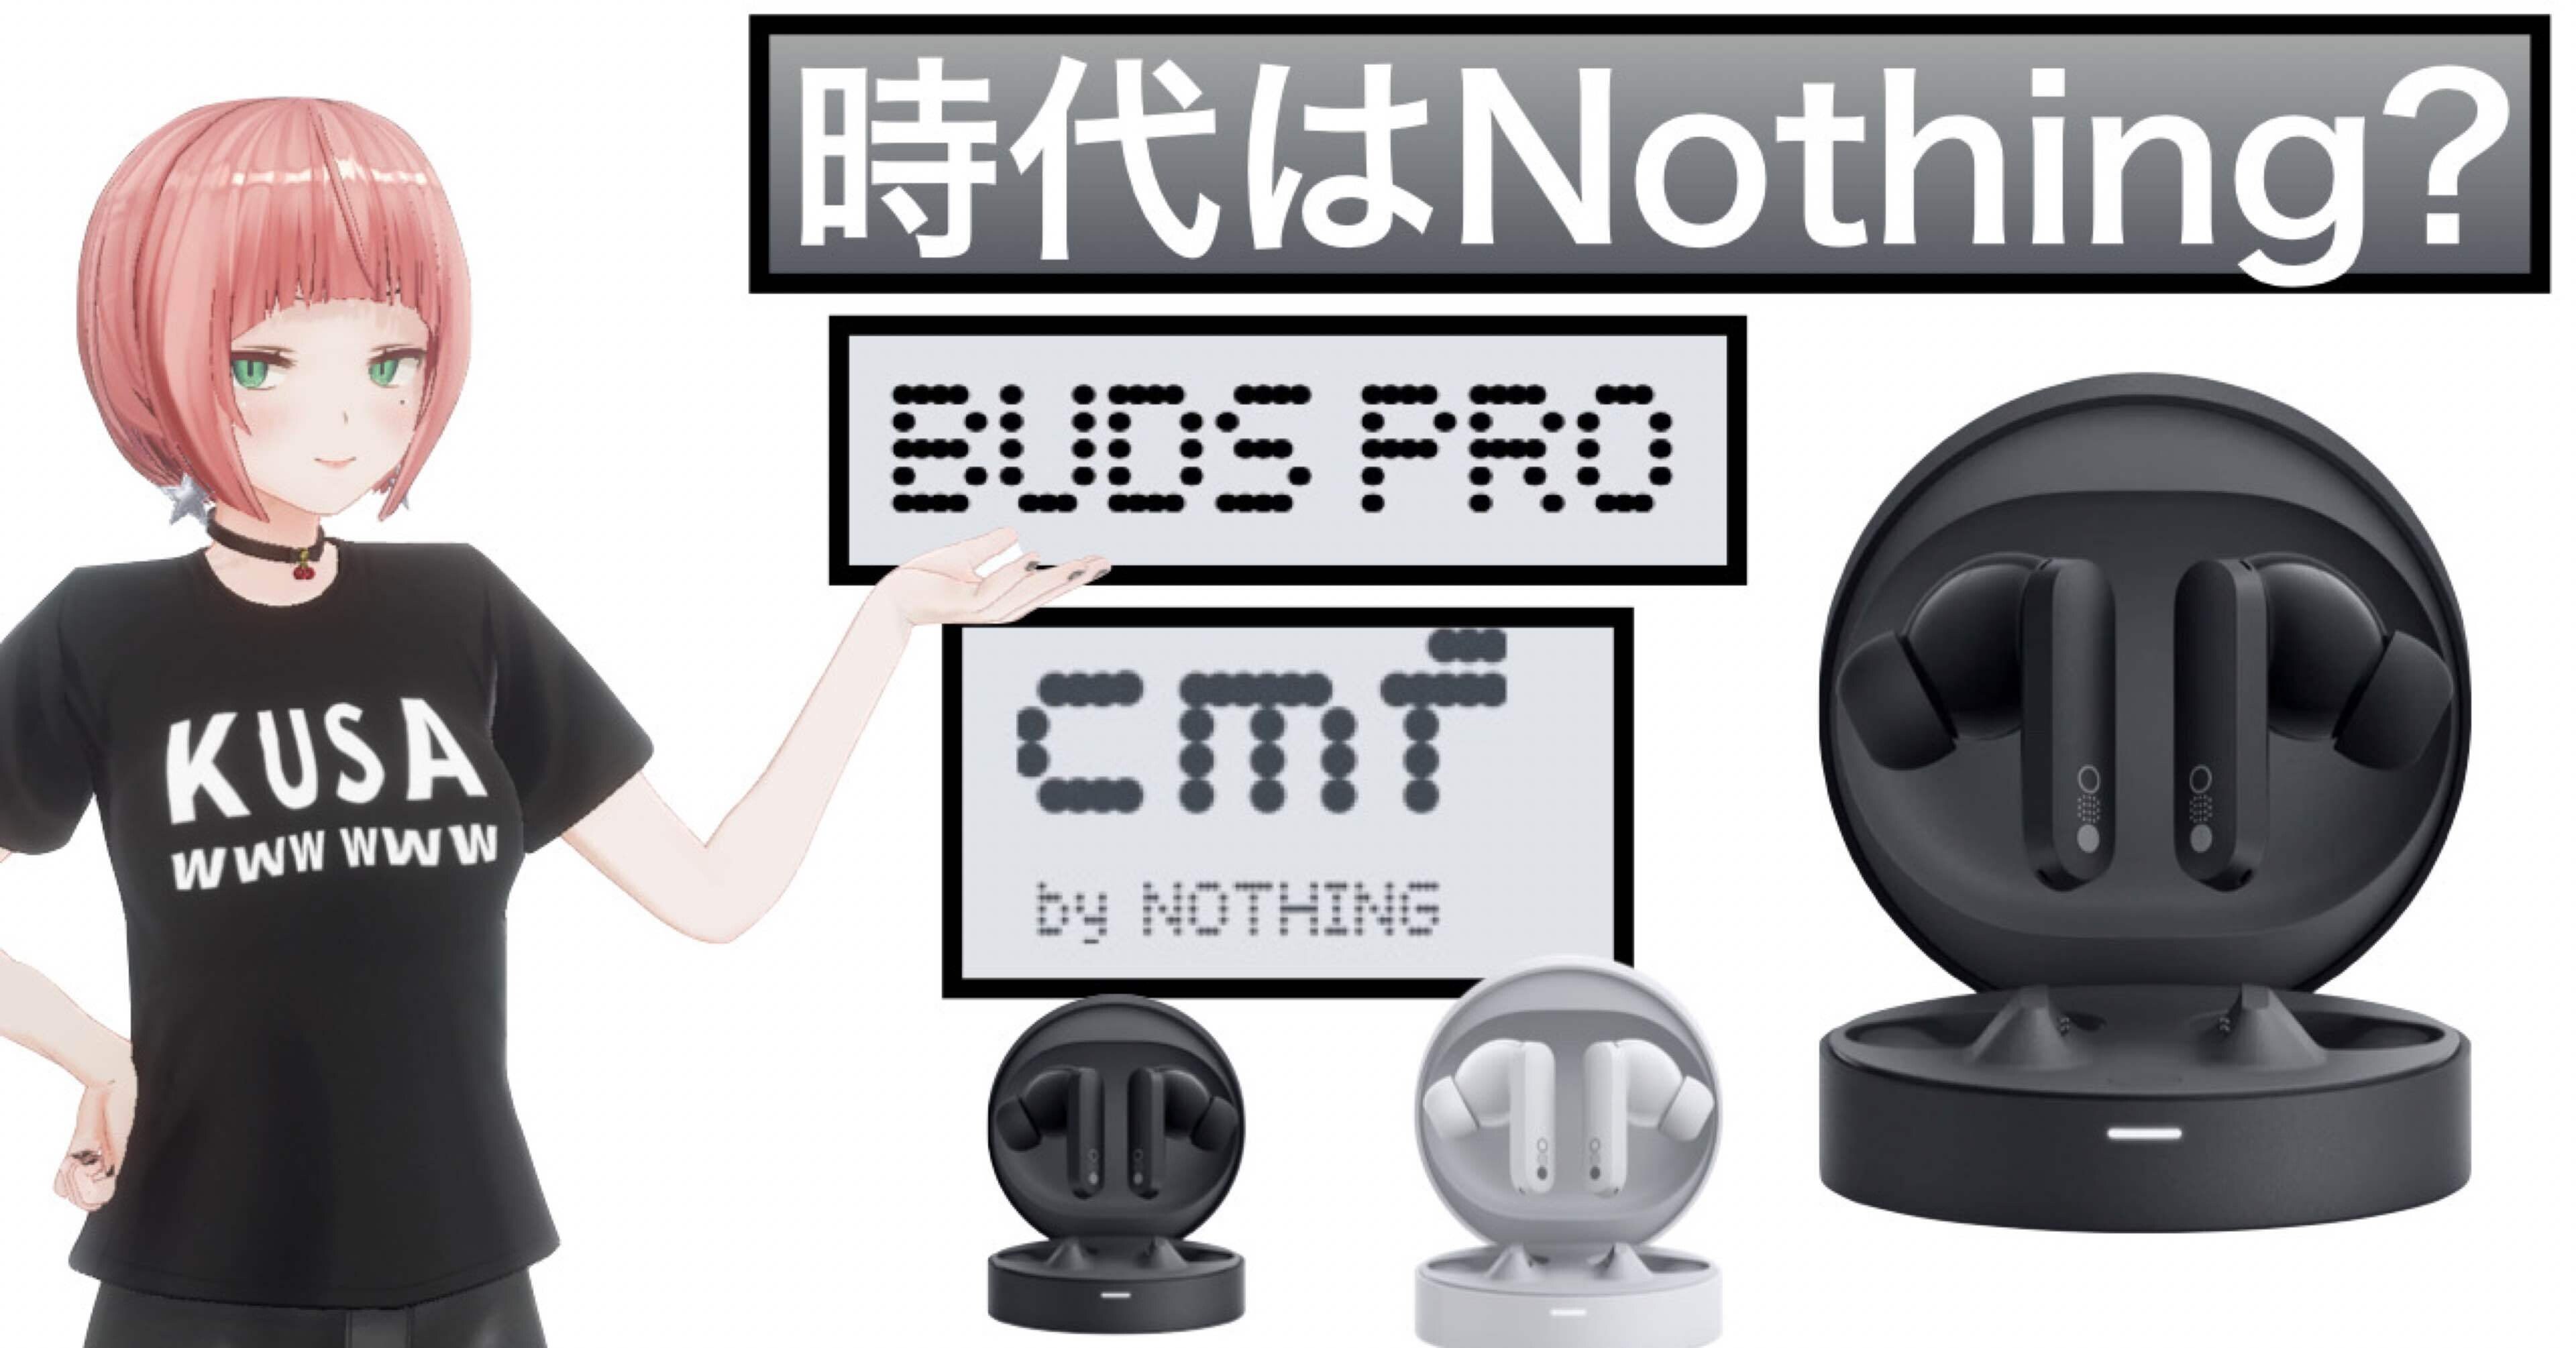 Buds Pro】コスパ最強のワイヤレスイヤホン現る！？【CMF by Nothing